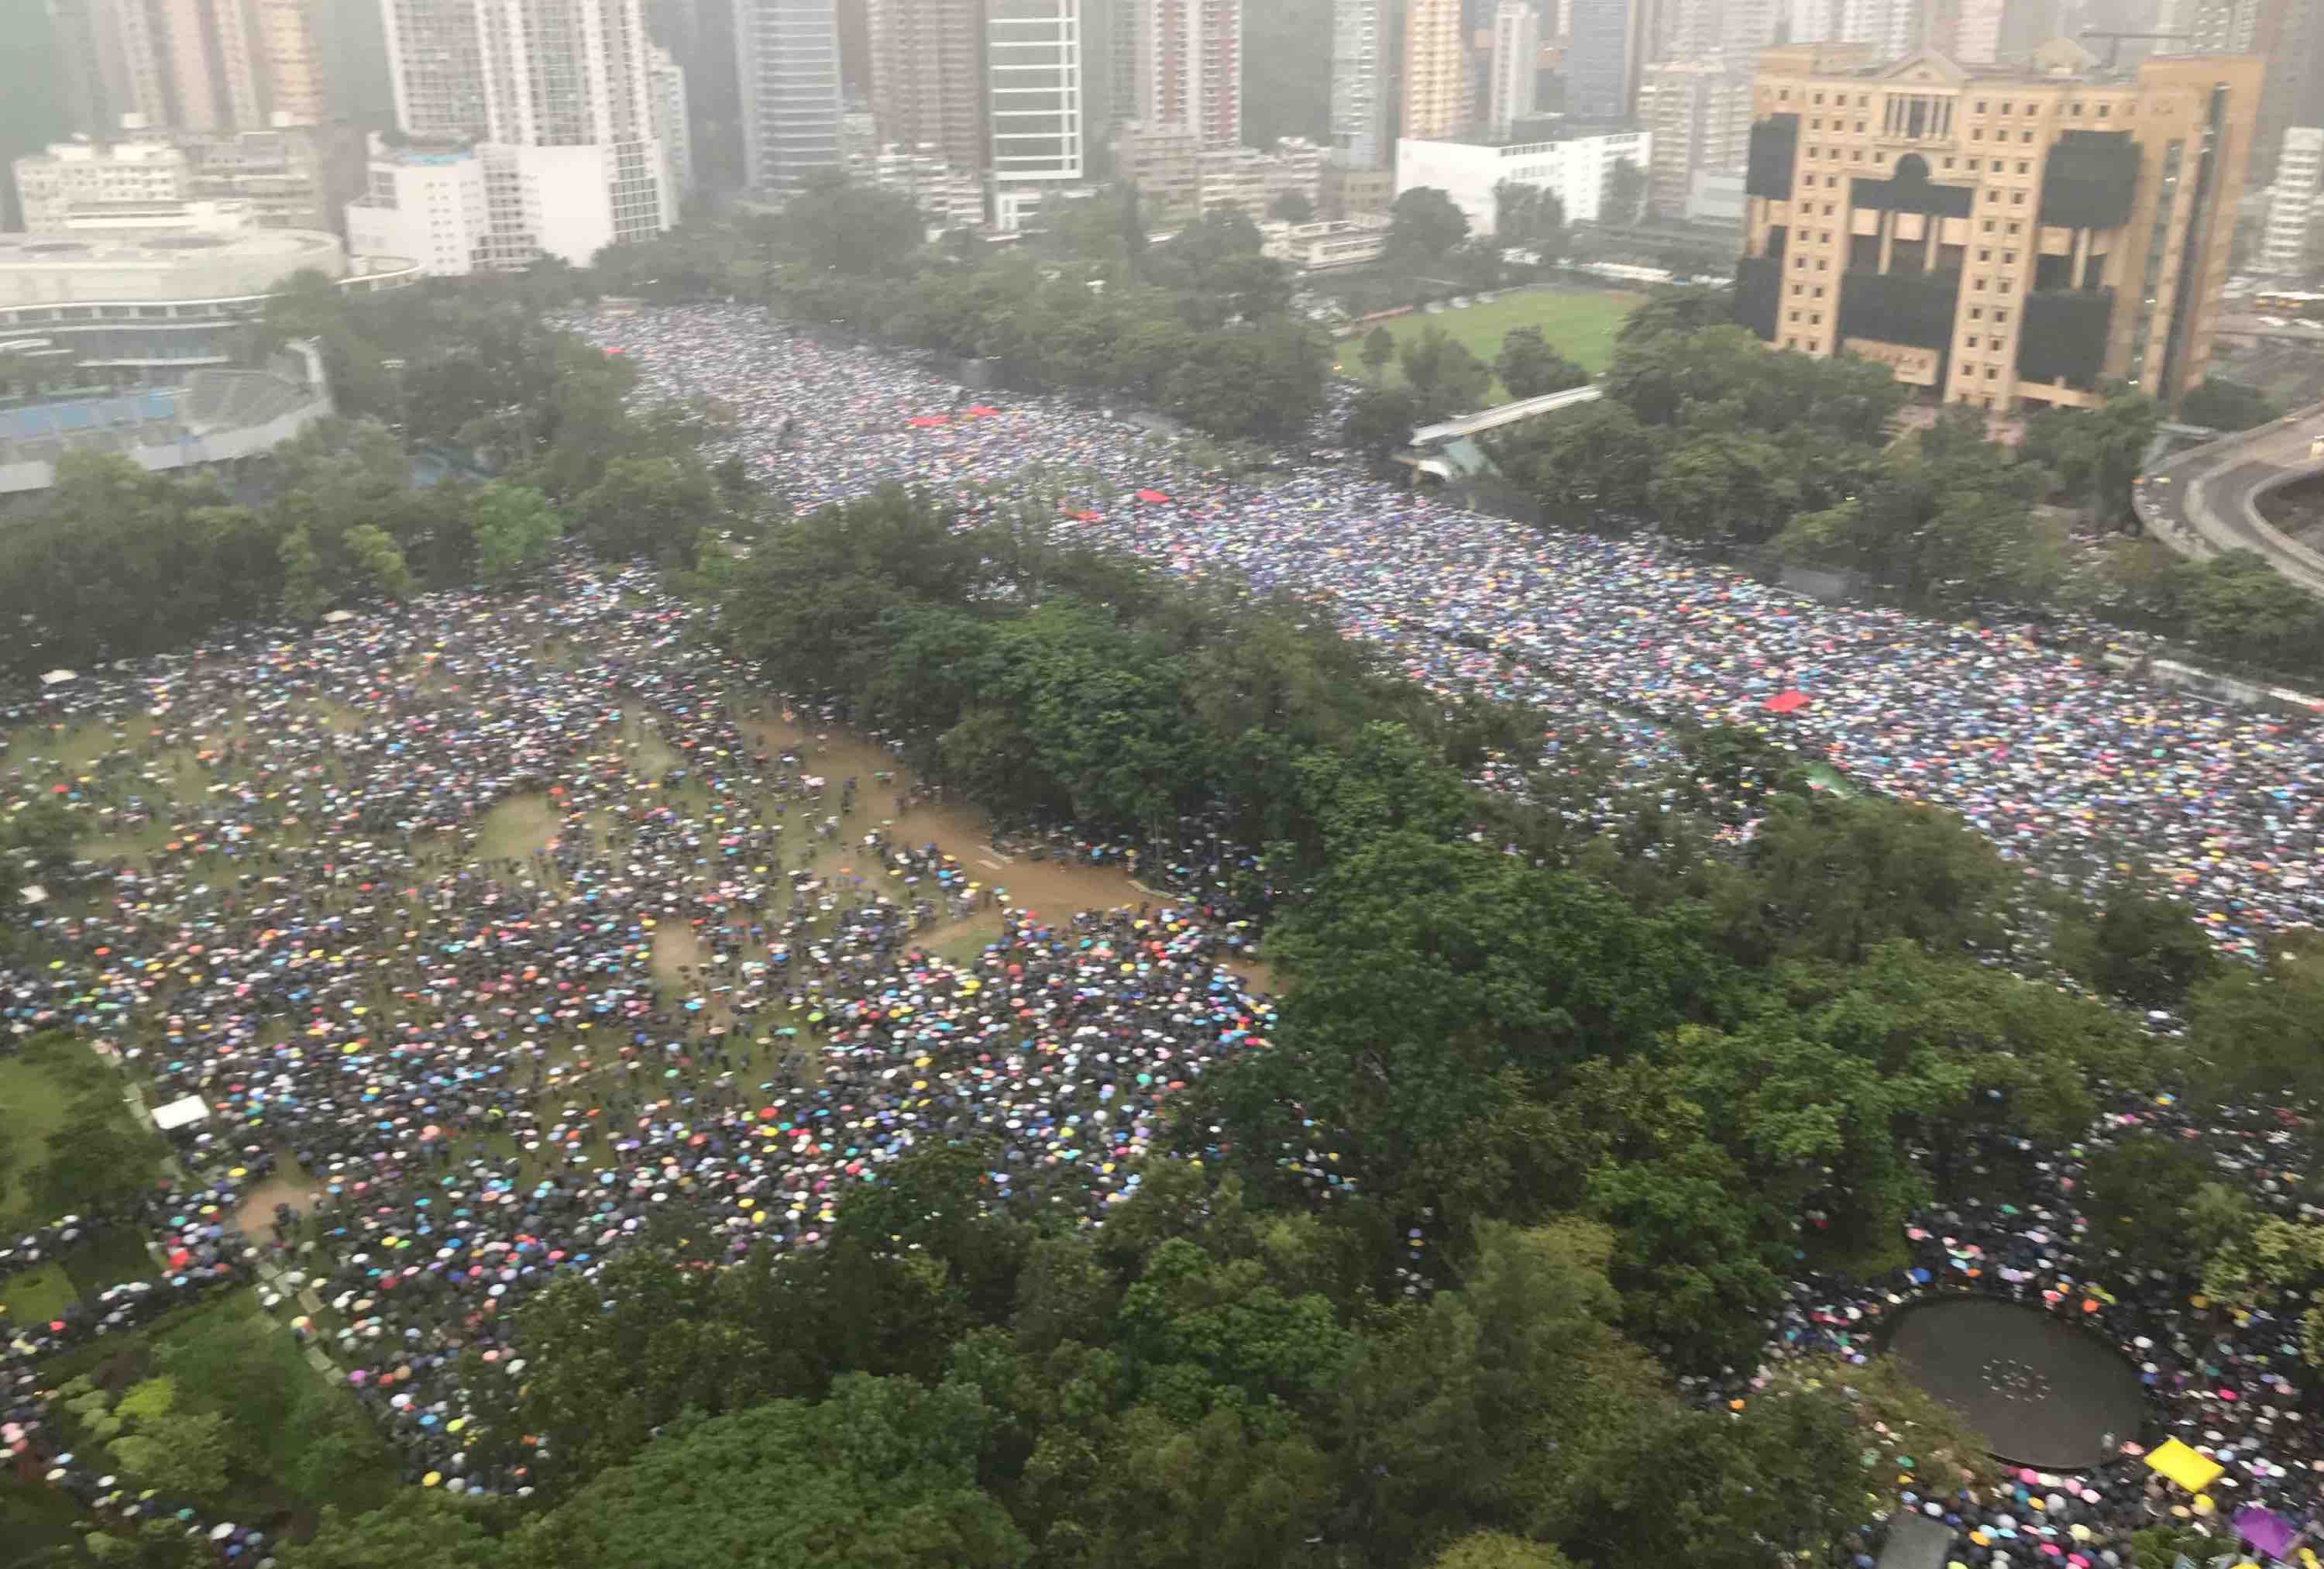 Protesters thronged Victoria Park, illustrating the ongoing support for Hong Kong’s protest movement, despite recent setbacks. Photo by Chad Williams.